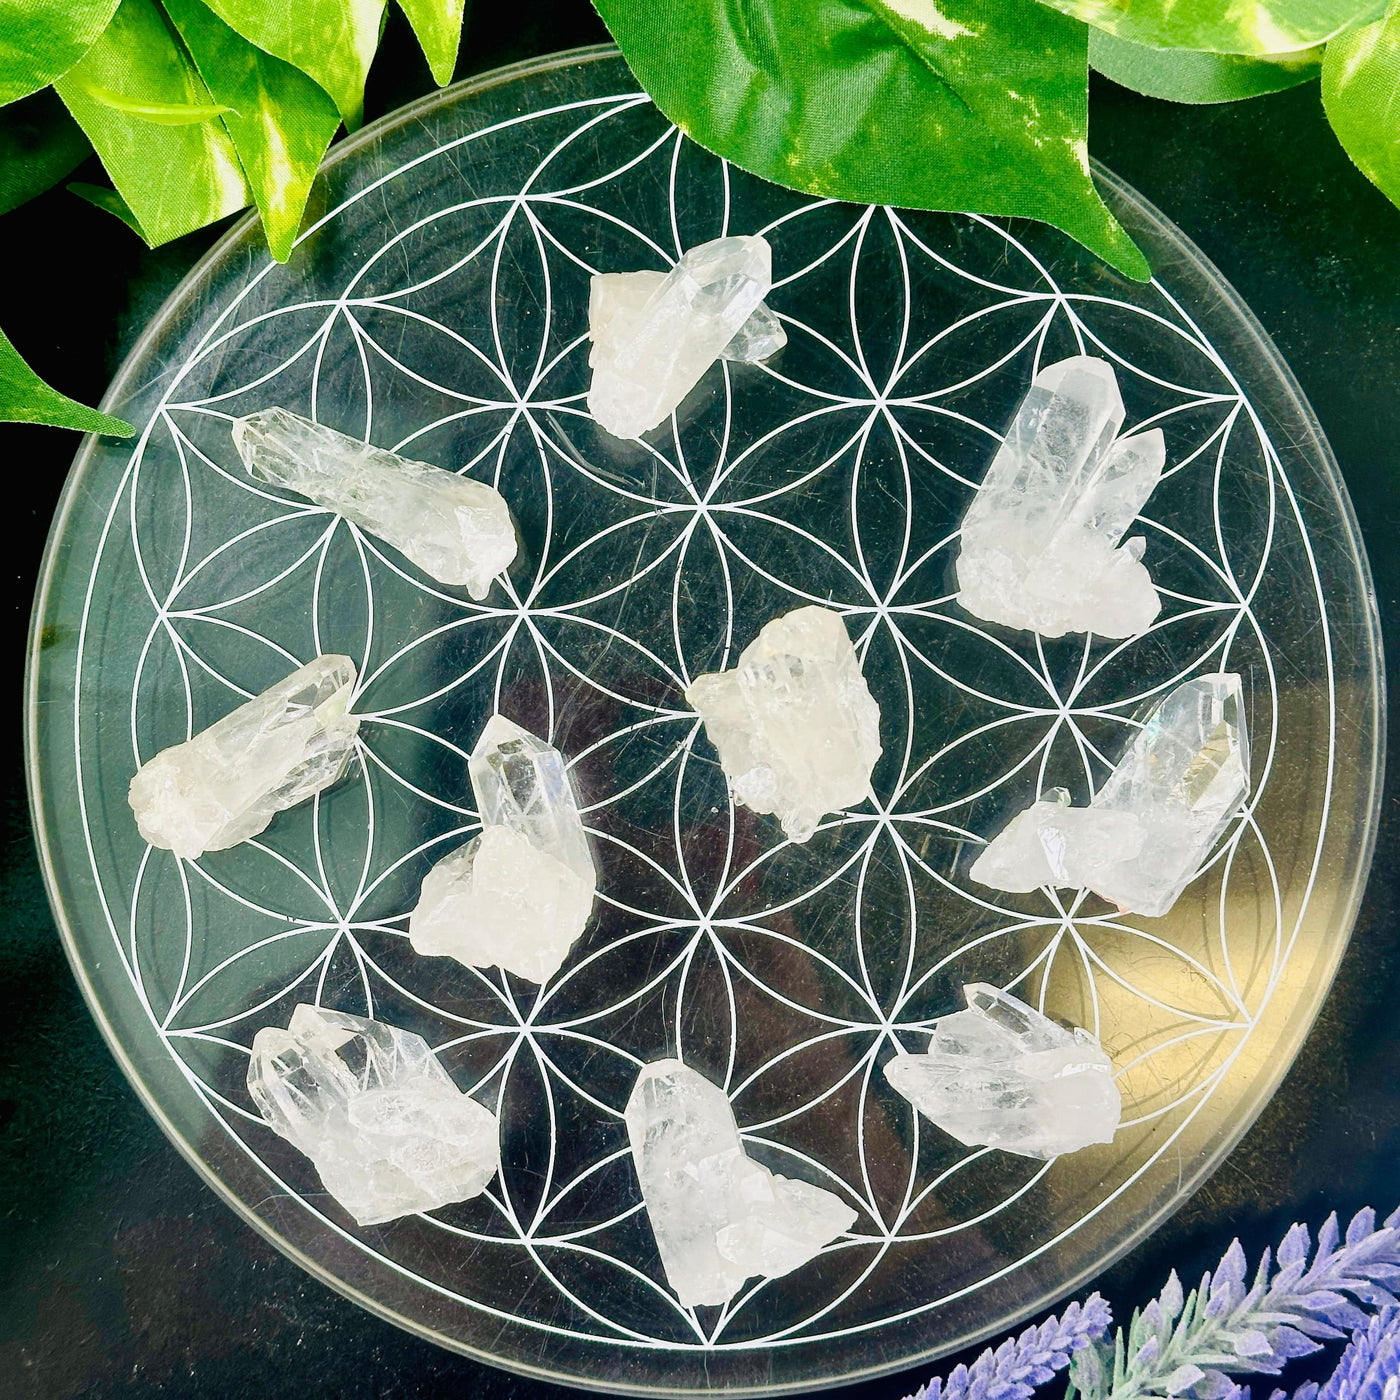 Crystal Quartz Cluster - High Grade Small Clusters - YOU CHOOSE all variants on flower of life dish over black background